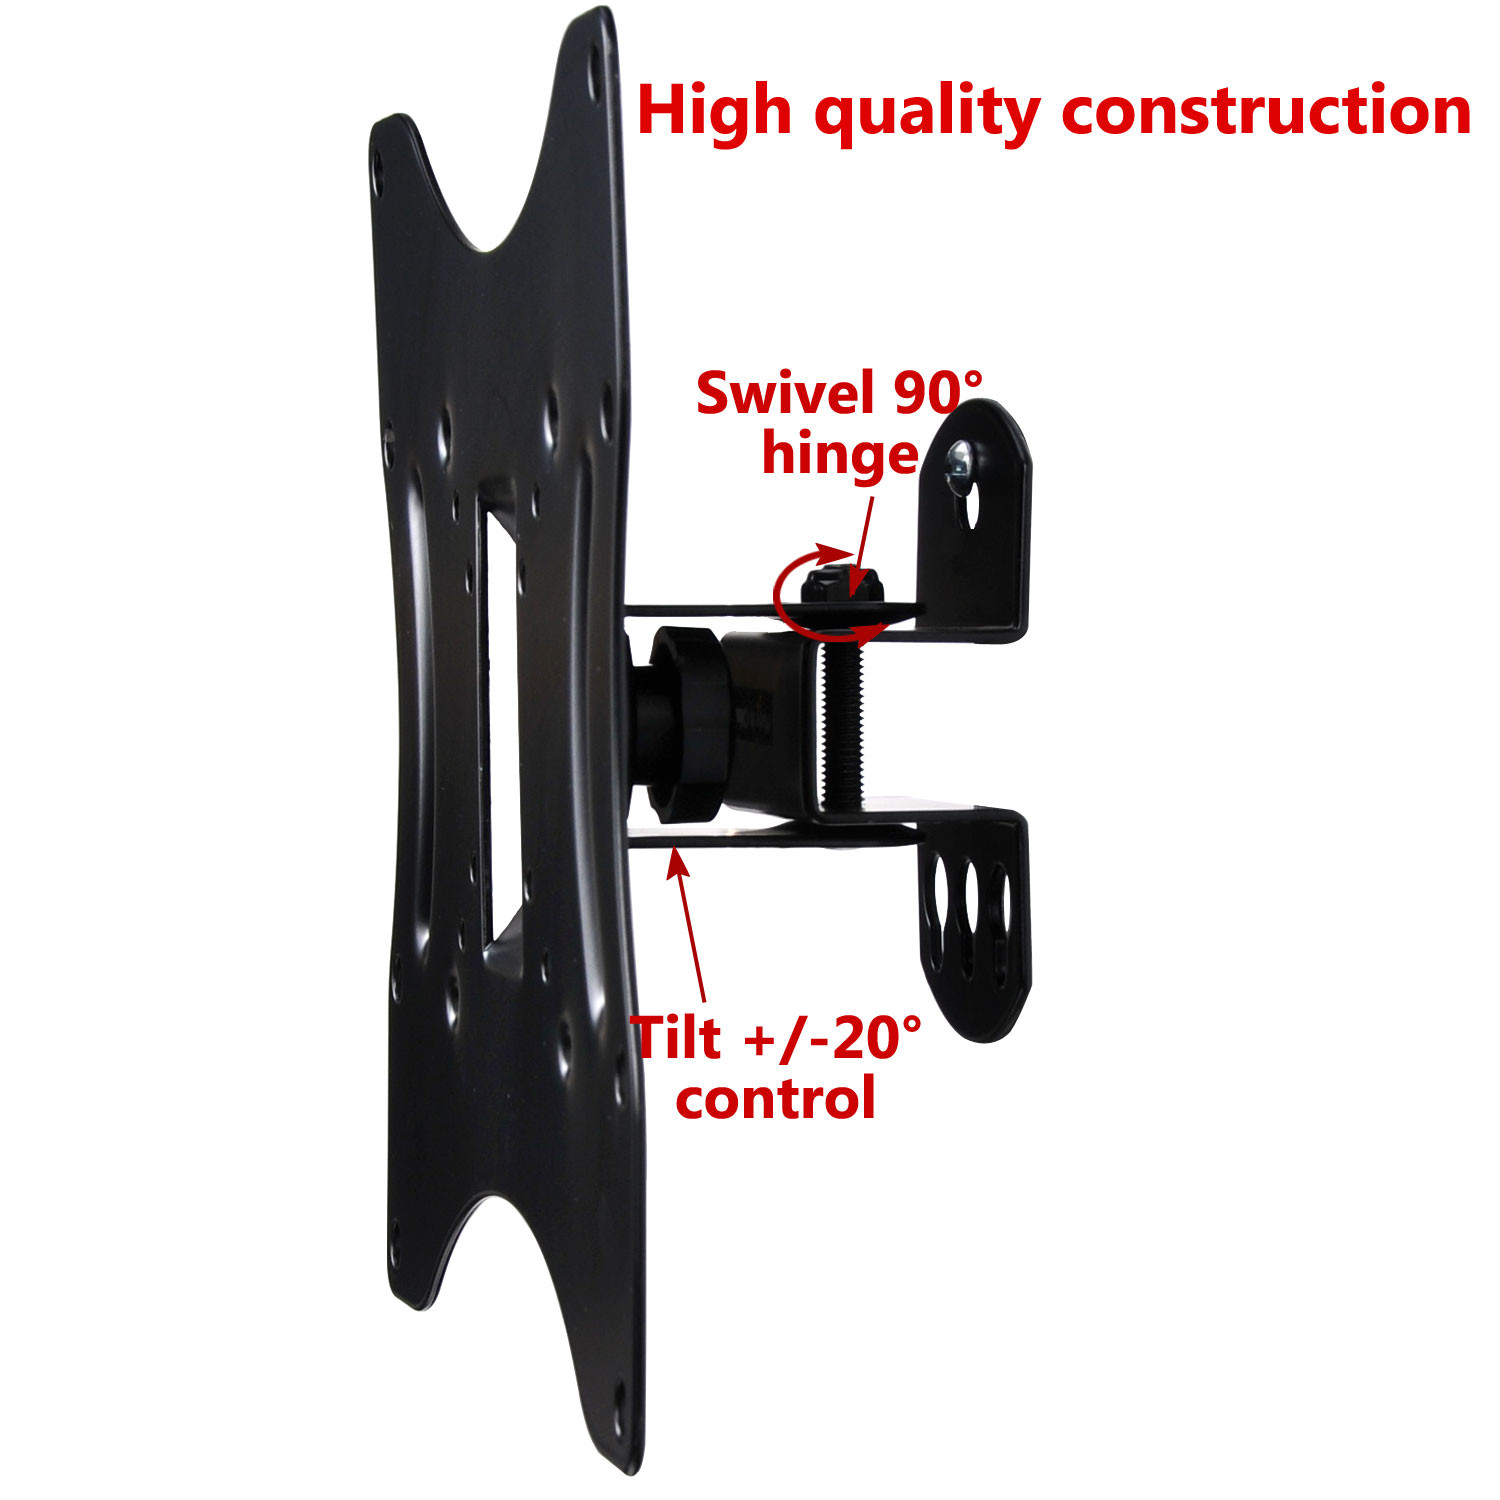 VideoSecu Swivel Tilt TV Monitor Wall Mount 23-40 inch LED LCD HDTV Flat Panel Screen Display with Mounting hole patterns 200/100/75/50mm BT1 - image 4 of 4